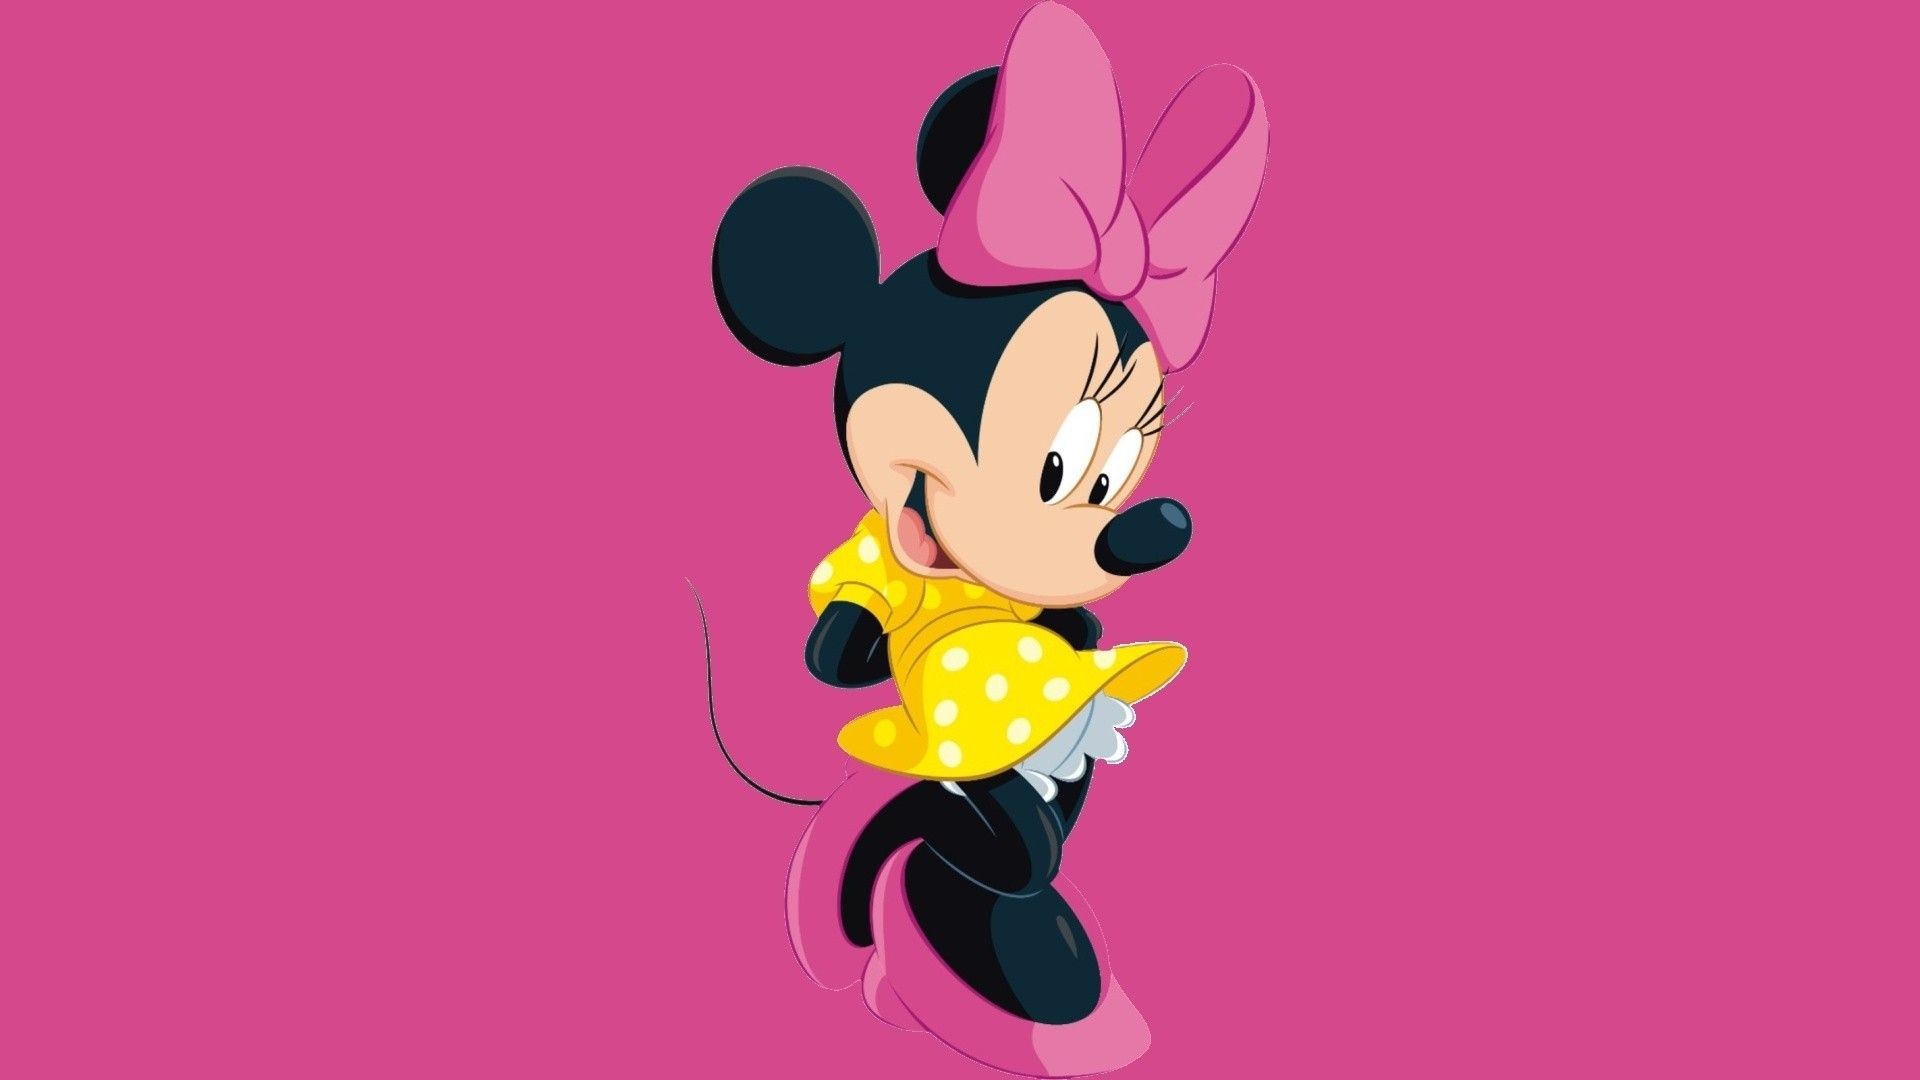 1920x1080 1680x1050 mickey minnie pictures | Minnie Mouse HD Wallpaper #1083 ...">